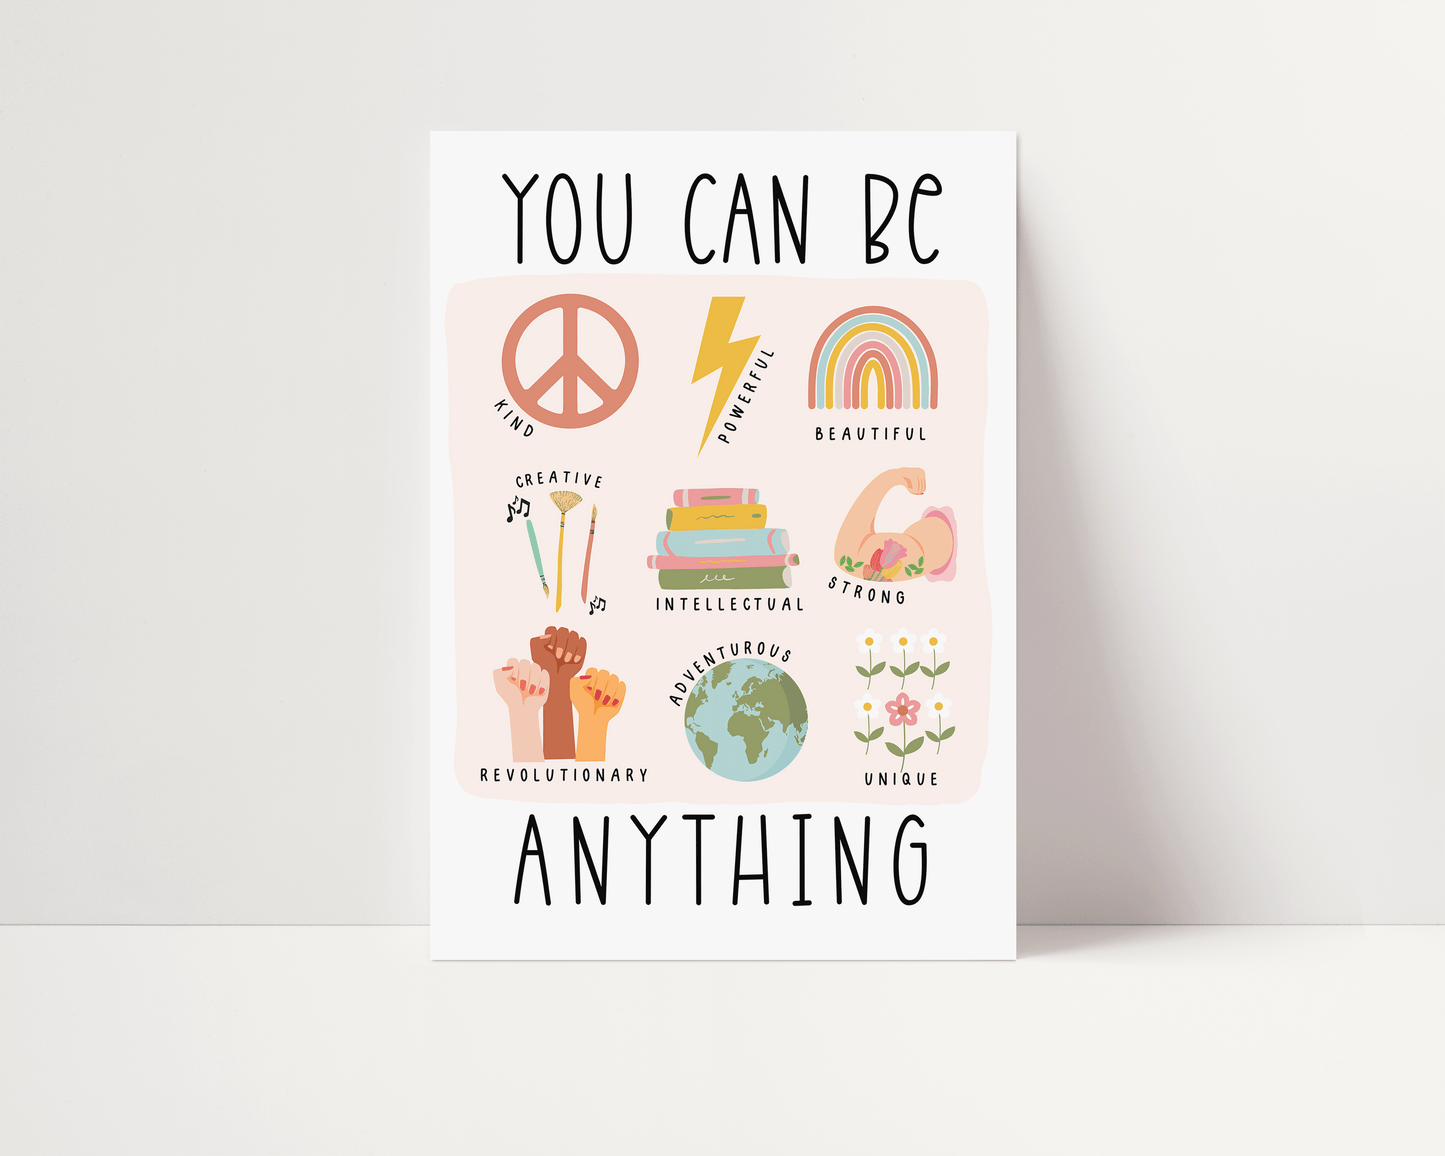 Girls Can Be Anything ® Original Art Print - More Wording Options Available